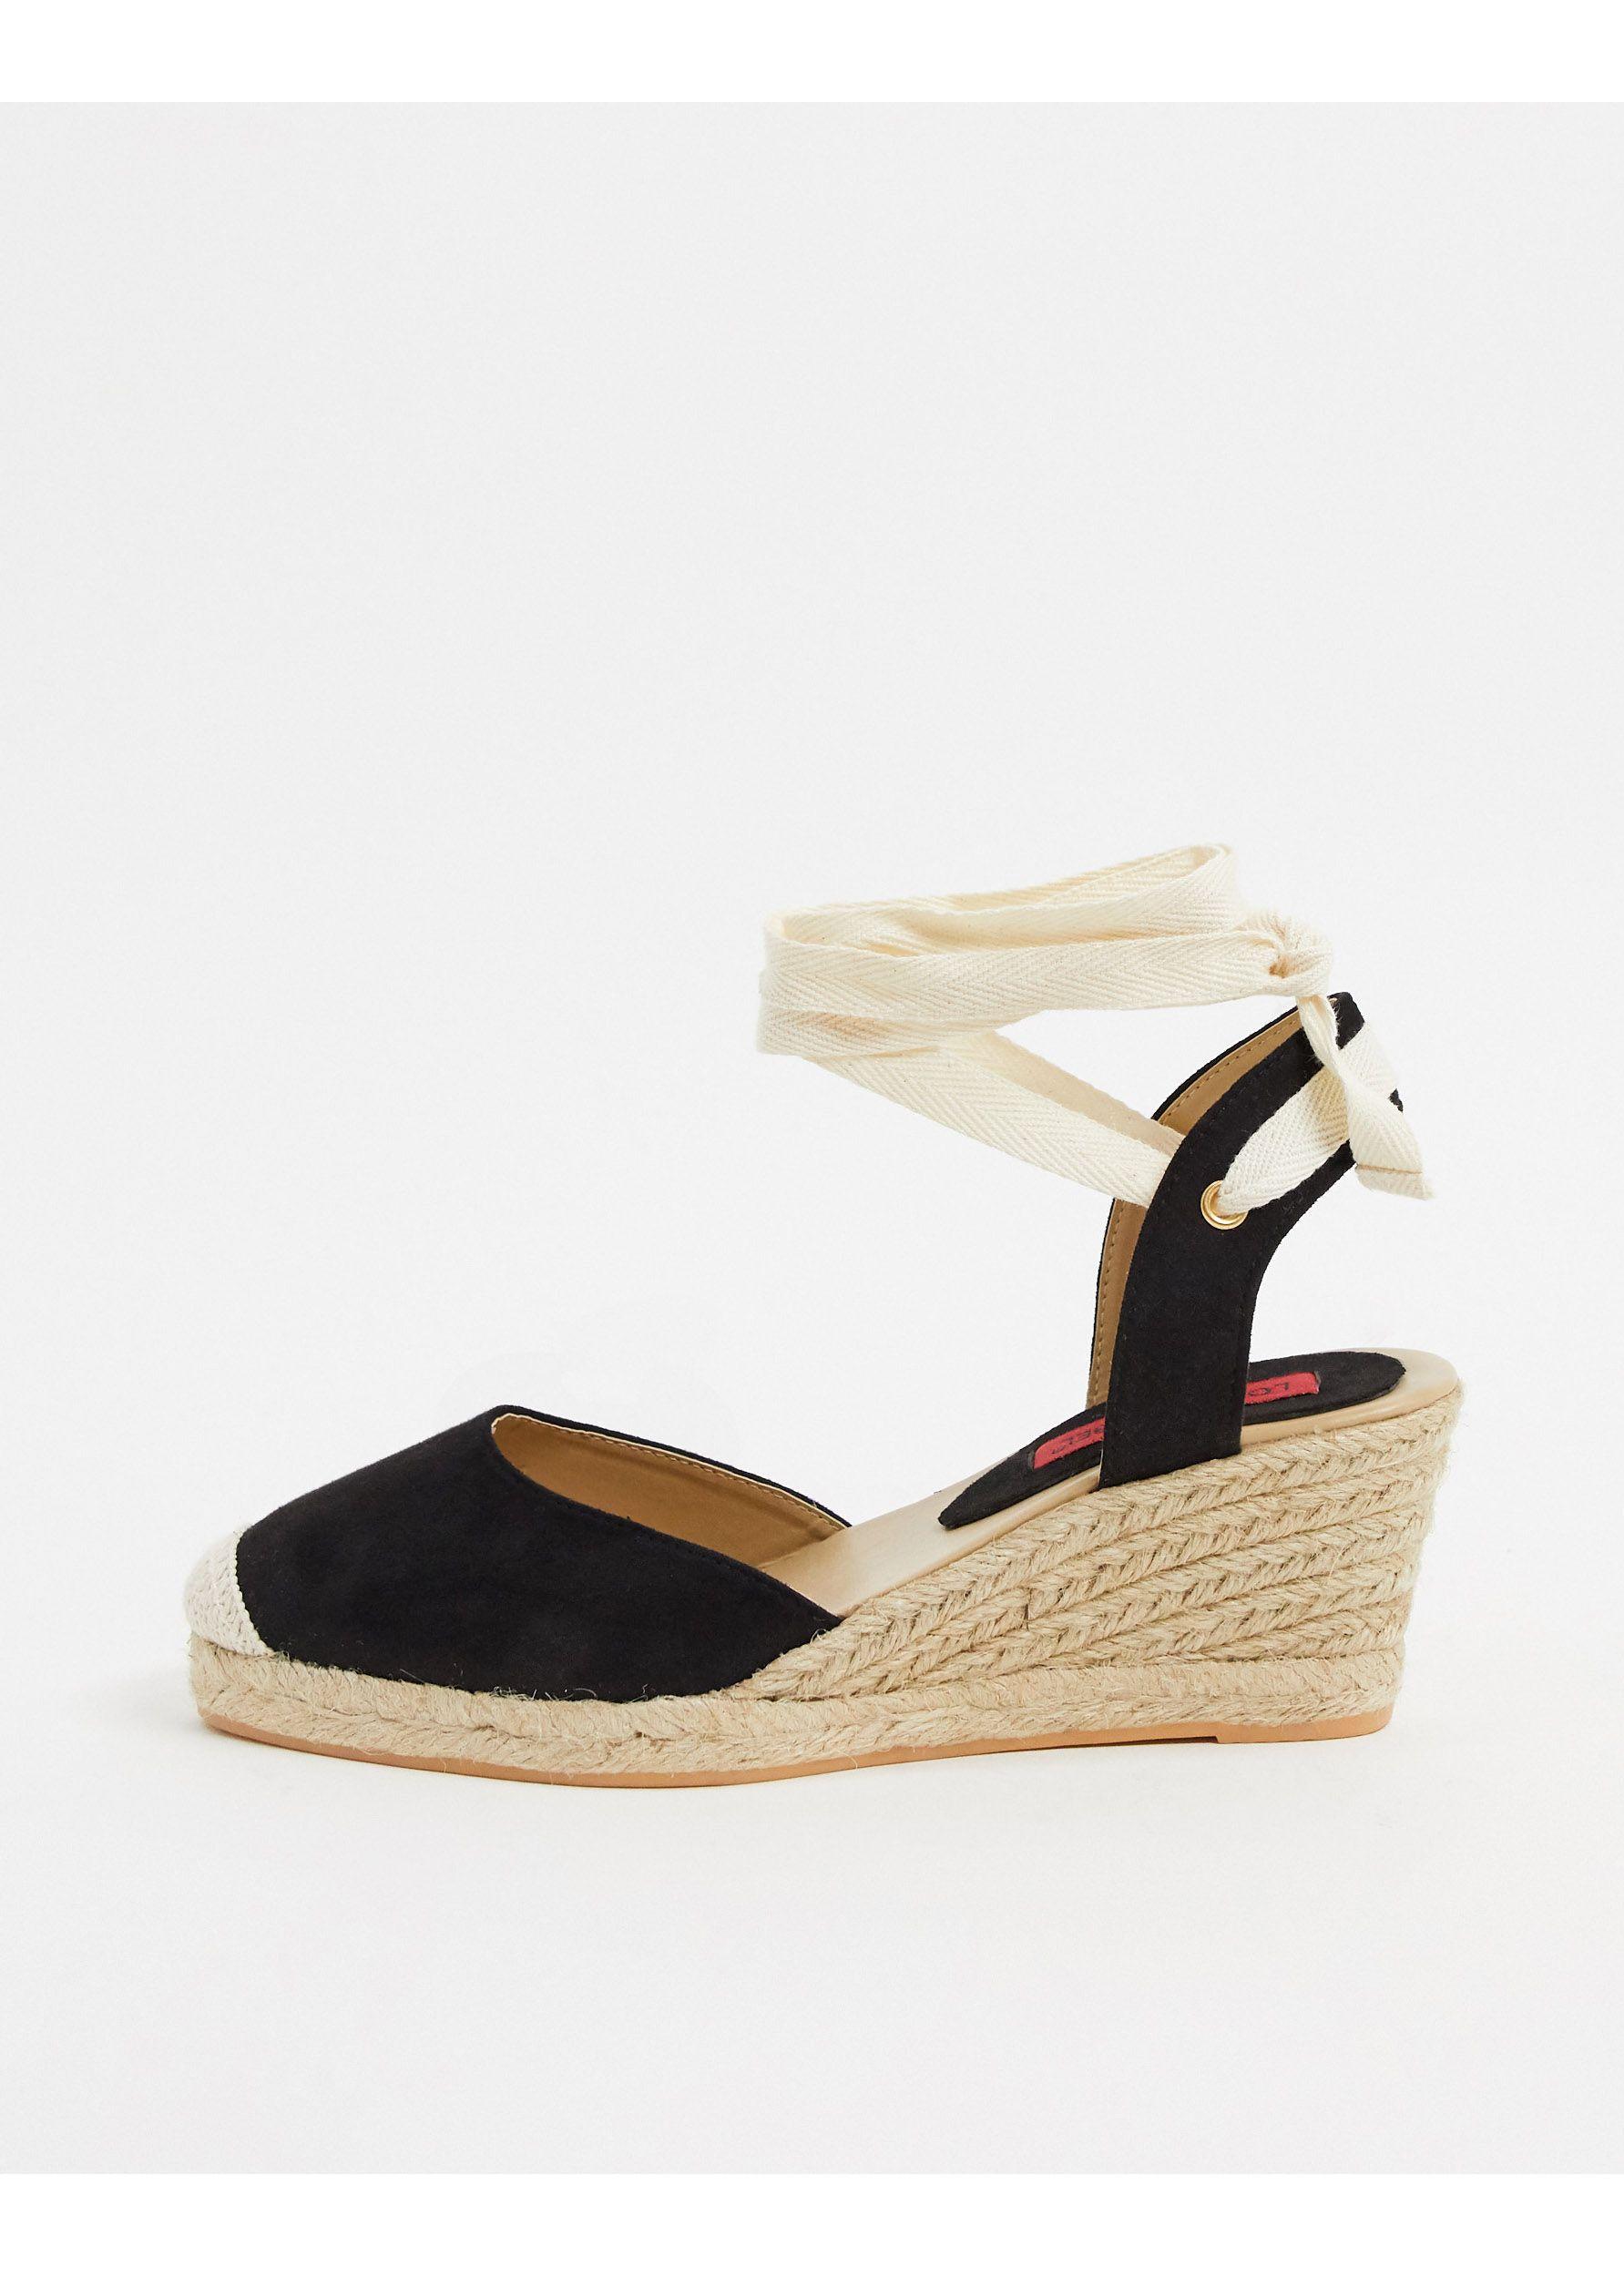 London Rebel Wide Fit Espadrille Wedges With Ankle Tie in Black - Save ...